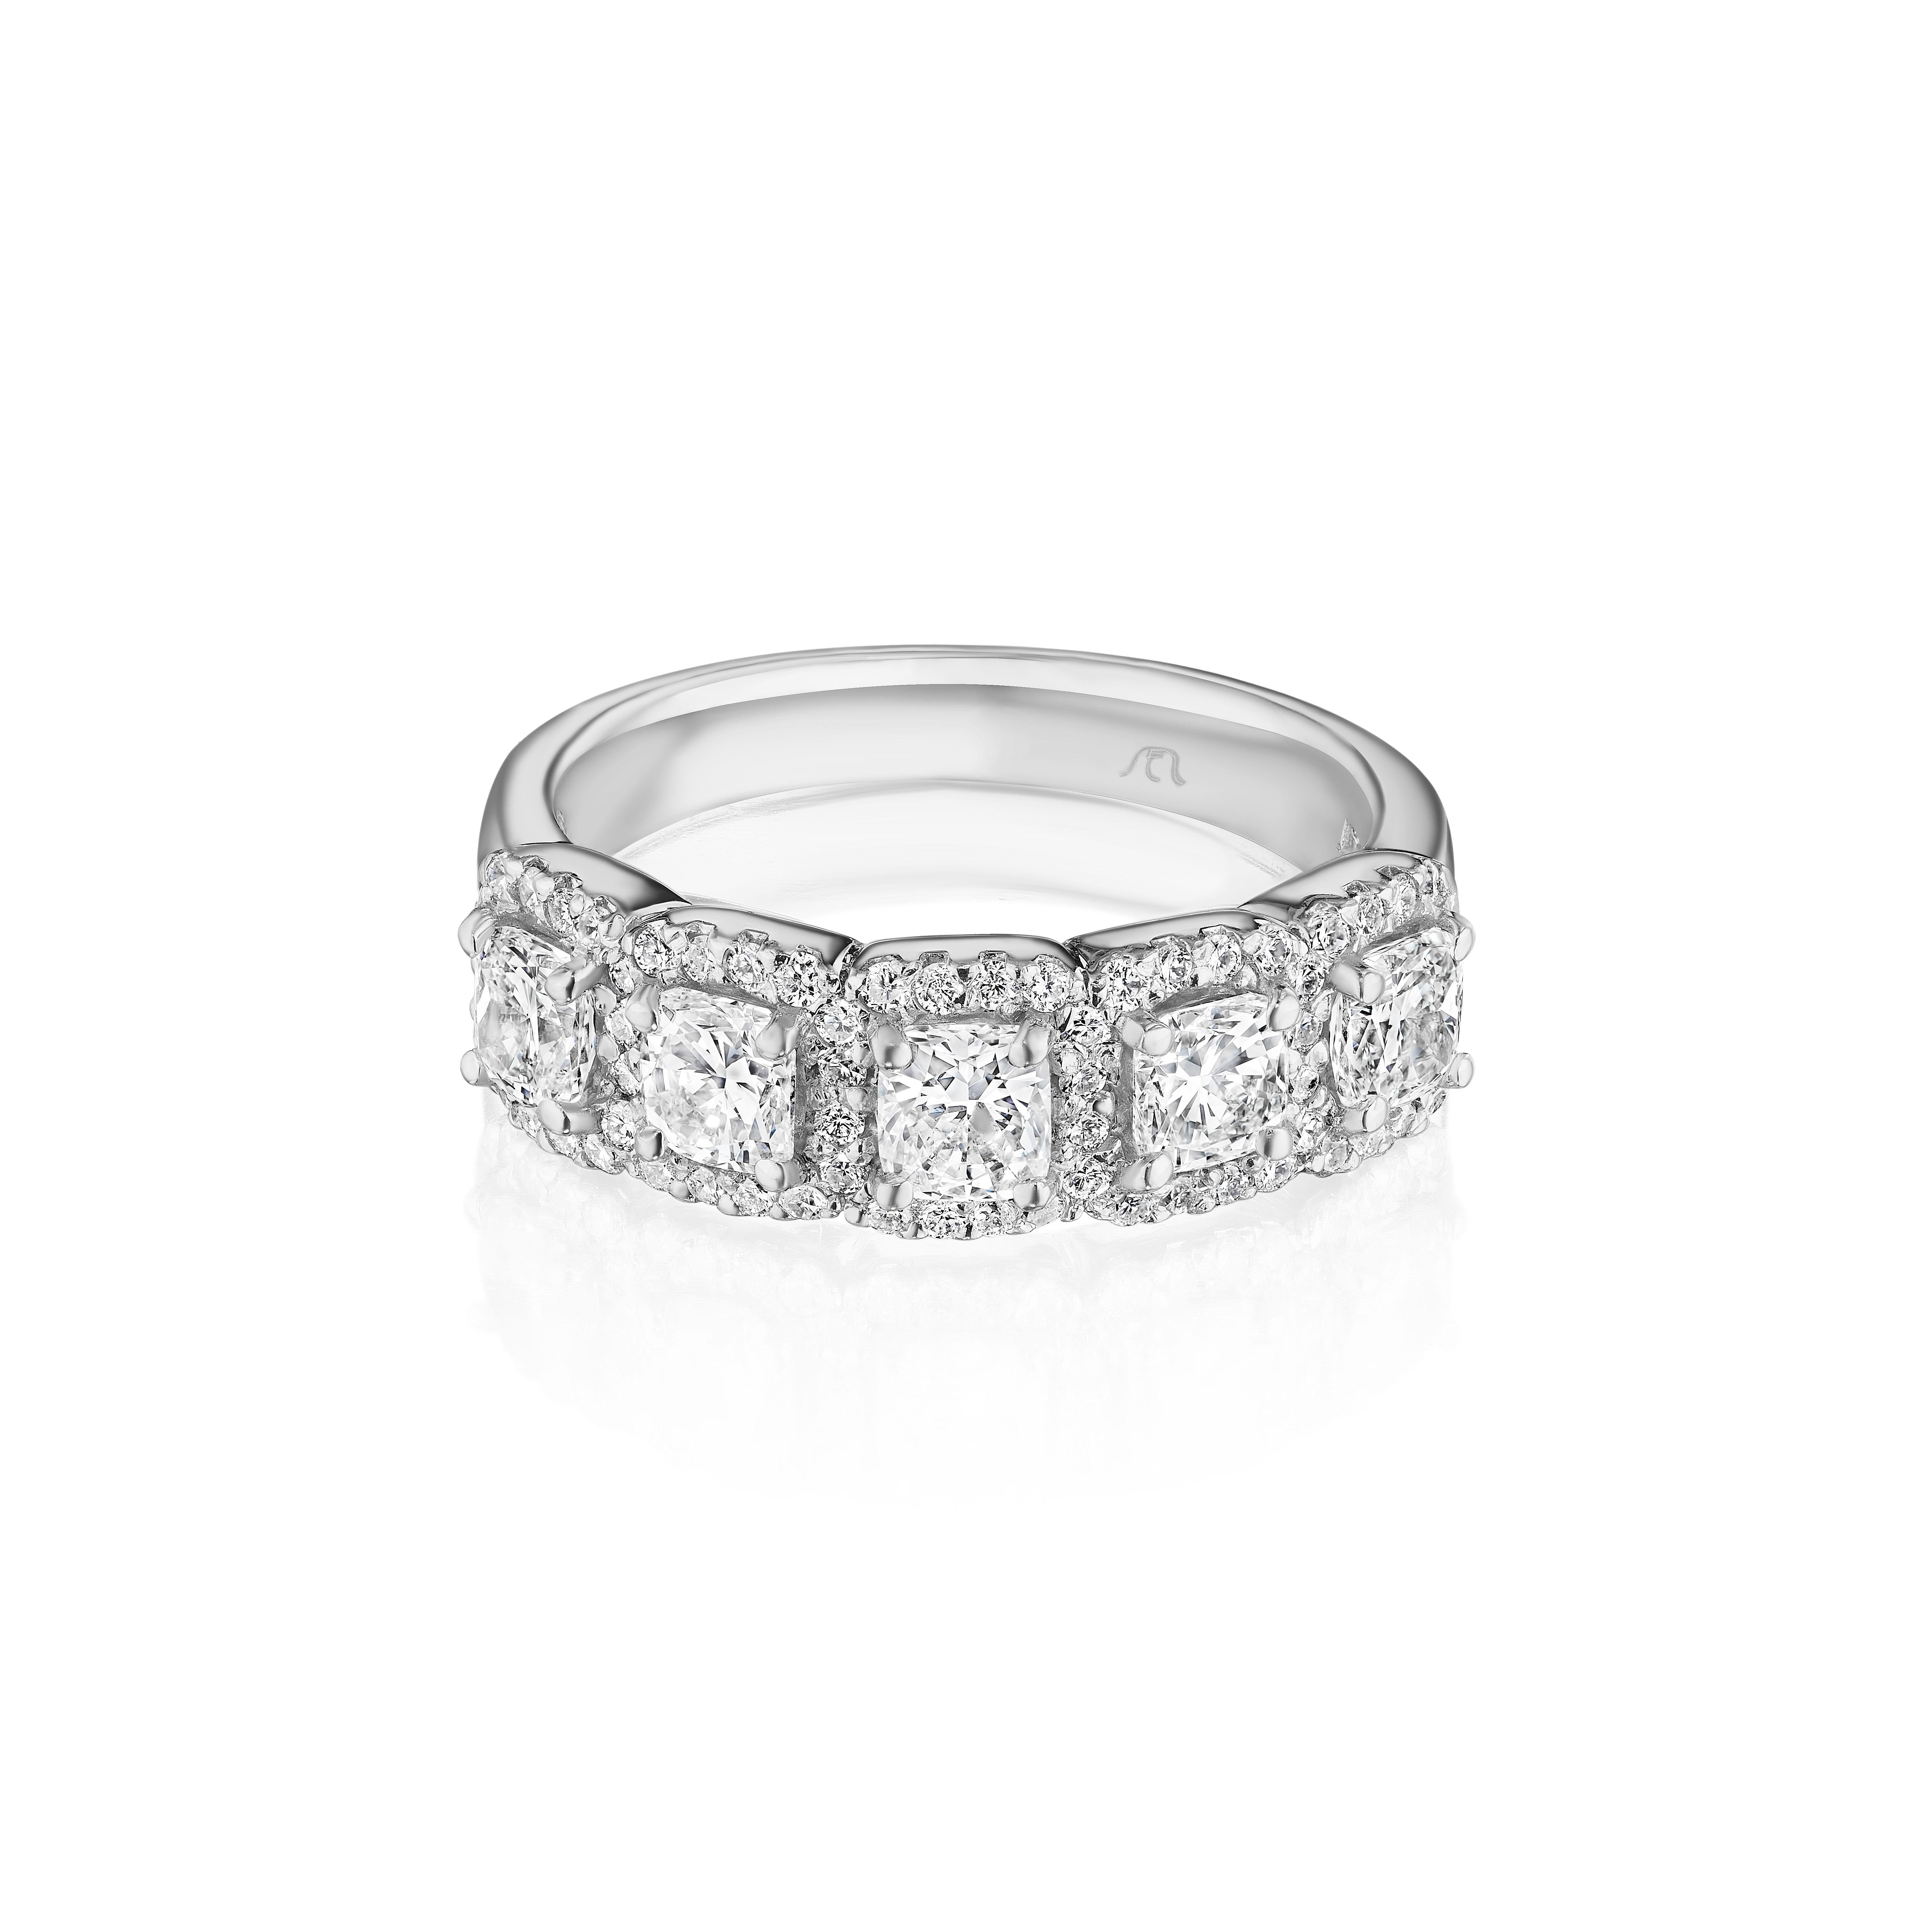 • Crafted in 18KT gold, this band is made with 5 cushion cut diamonds which are framed by a delicate halo comprised of round brilliant cut diamonds. The band has a combining total weight of approximately 1.55 carats.

Worn beautifully on its own, or